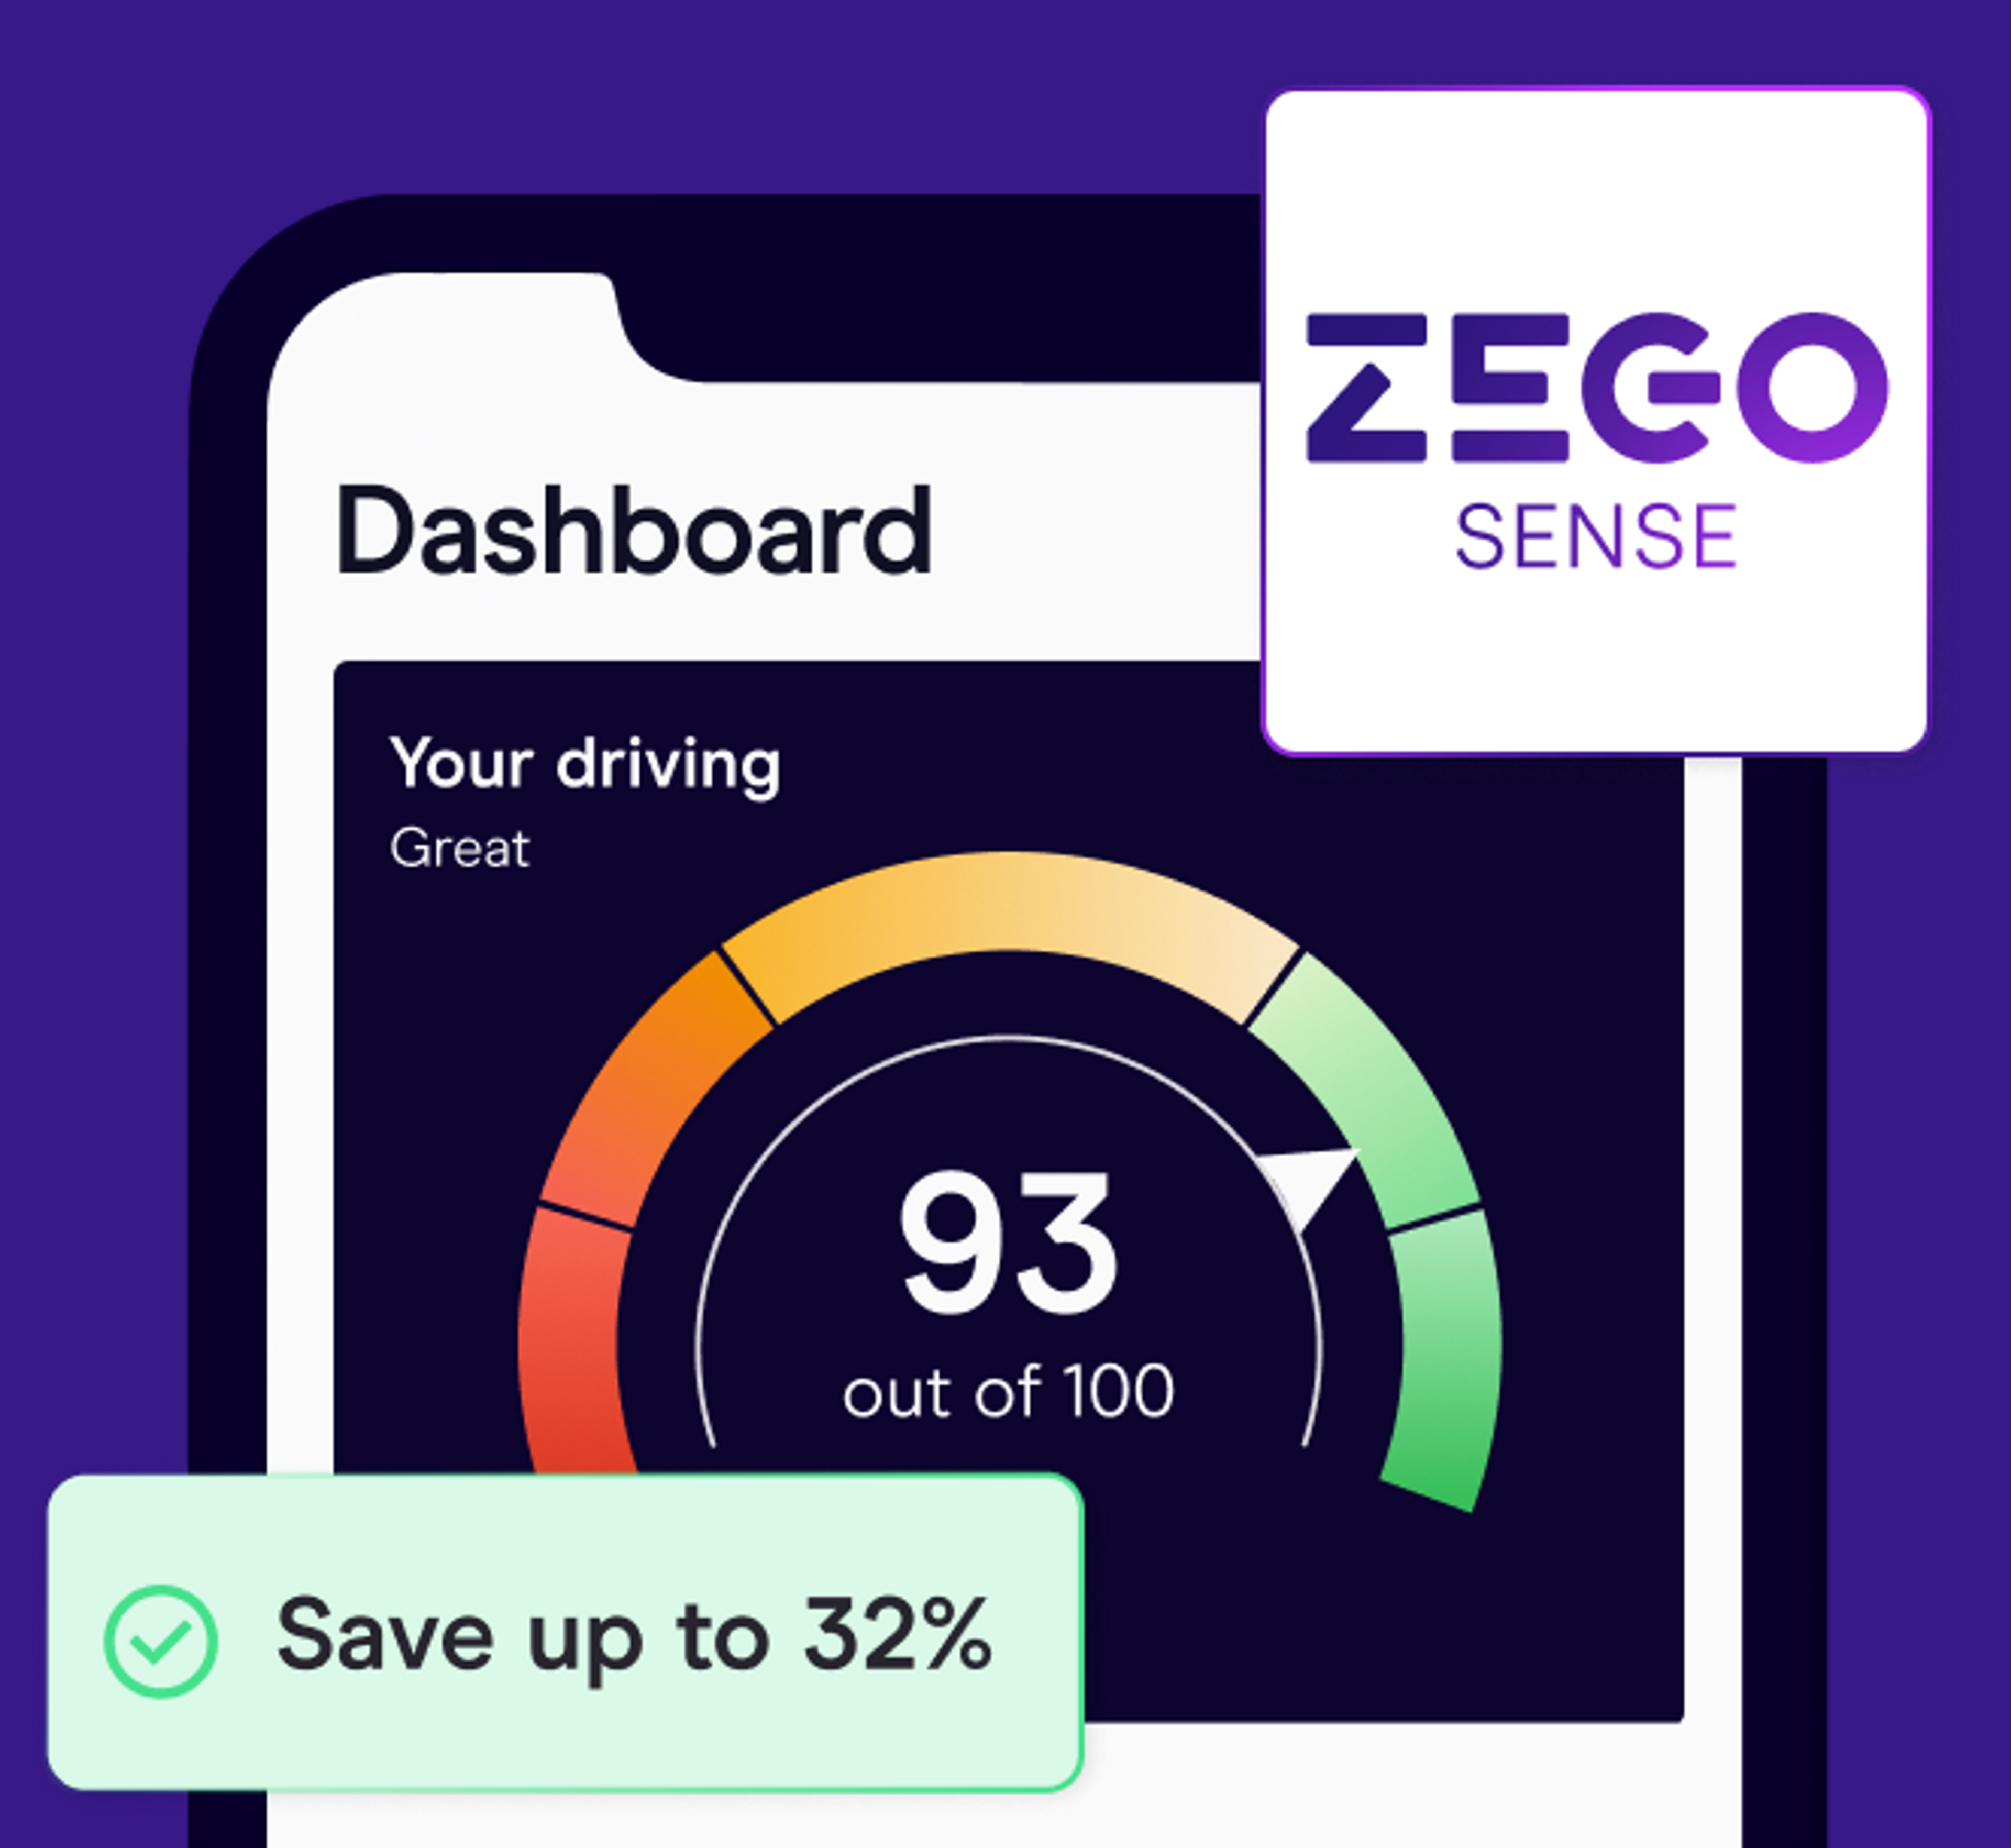 zego sense insurance app for uber taxi drivers